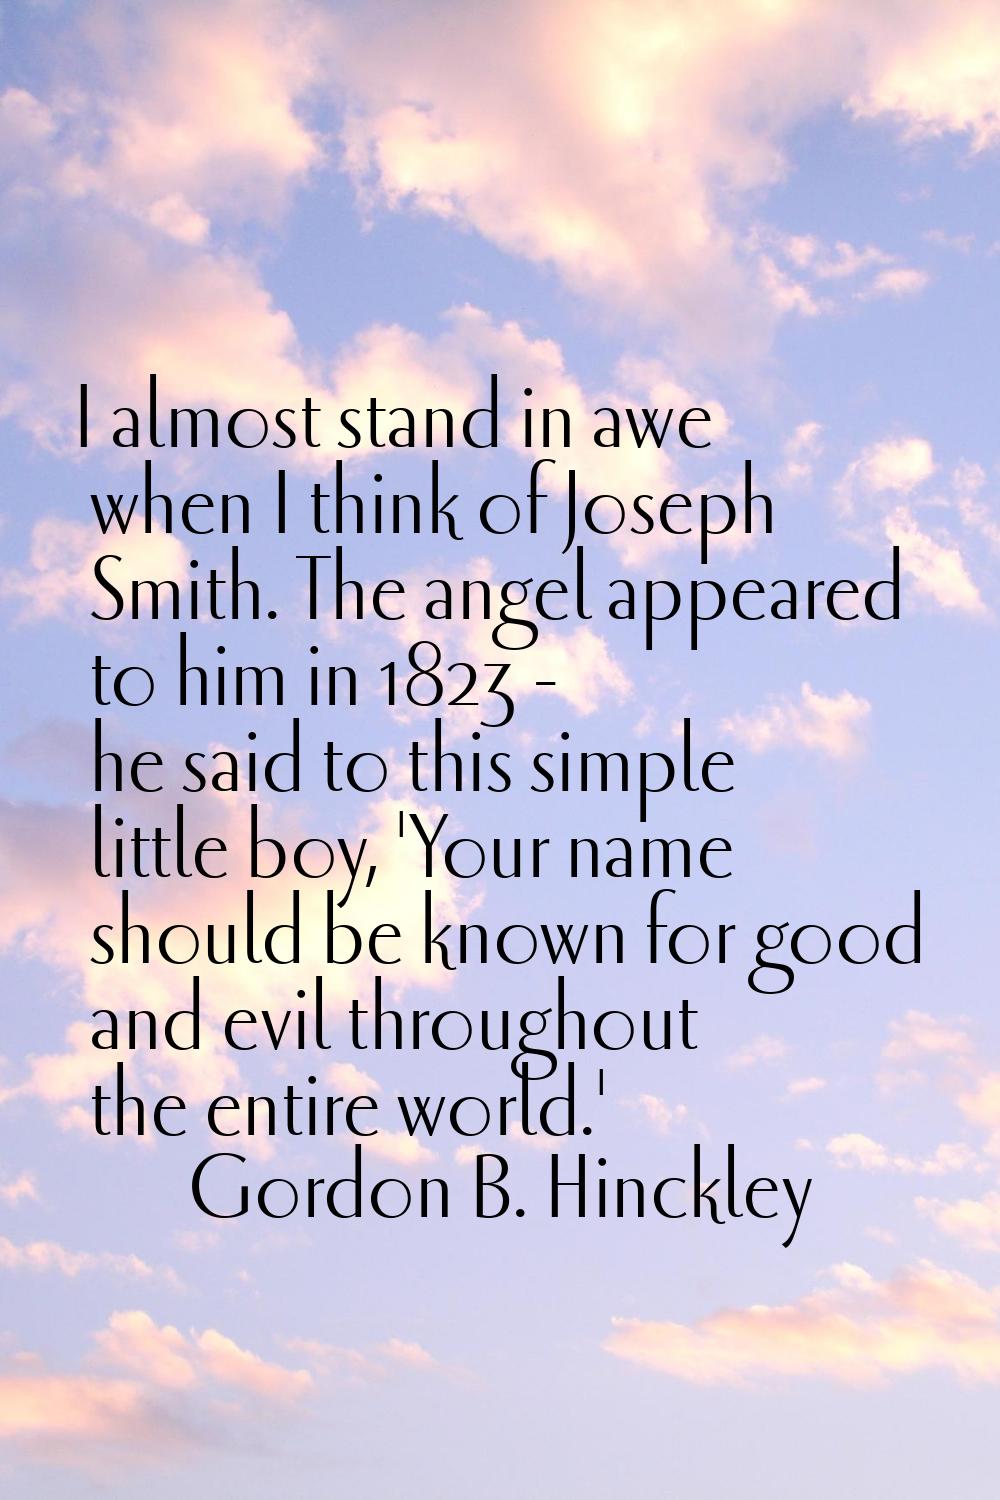 I almost stand in awe when I think of Joseph Smith. The angel appeared to him in 1823 - he said to 